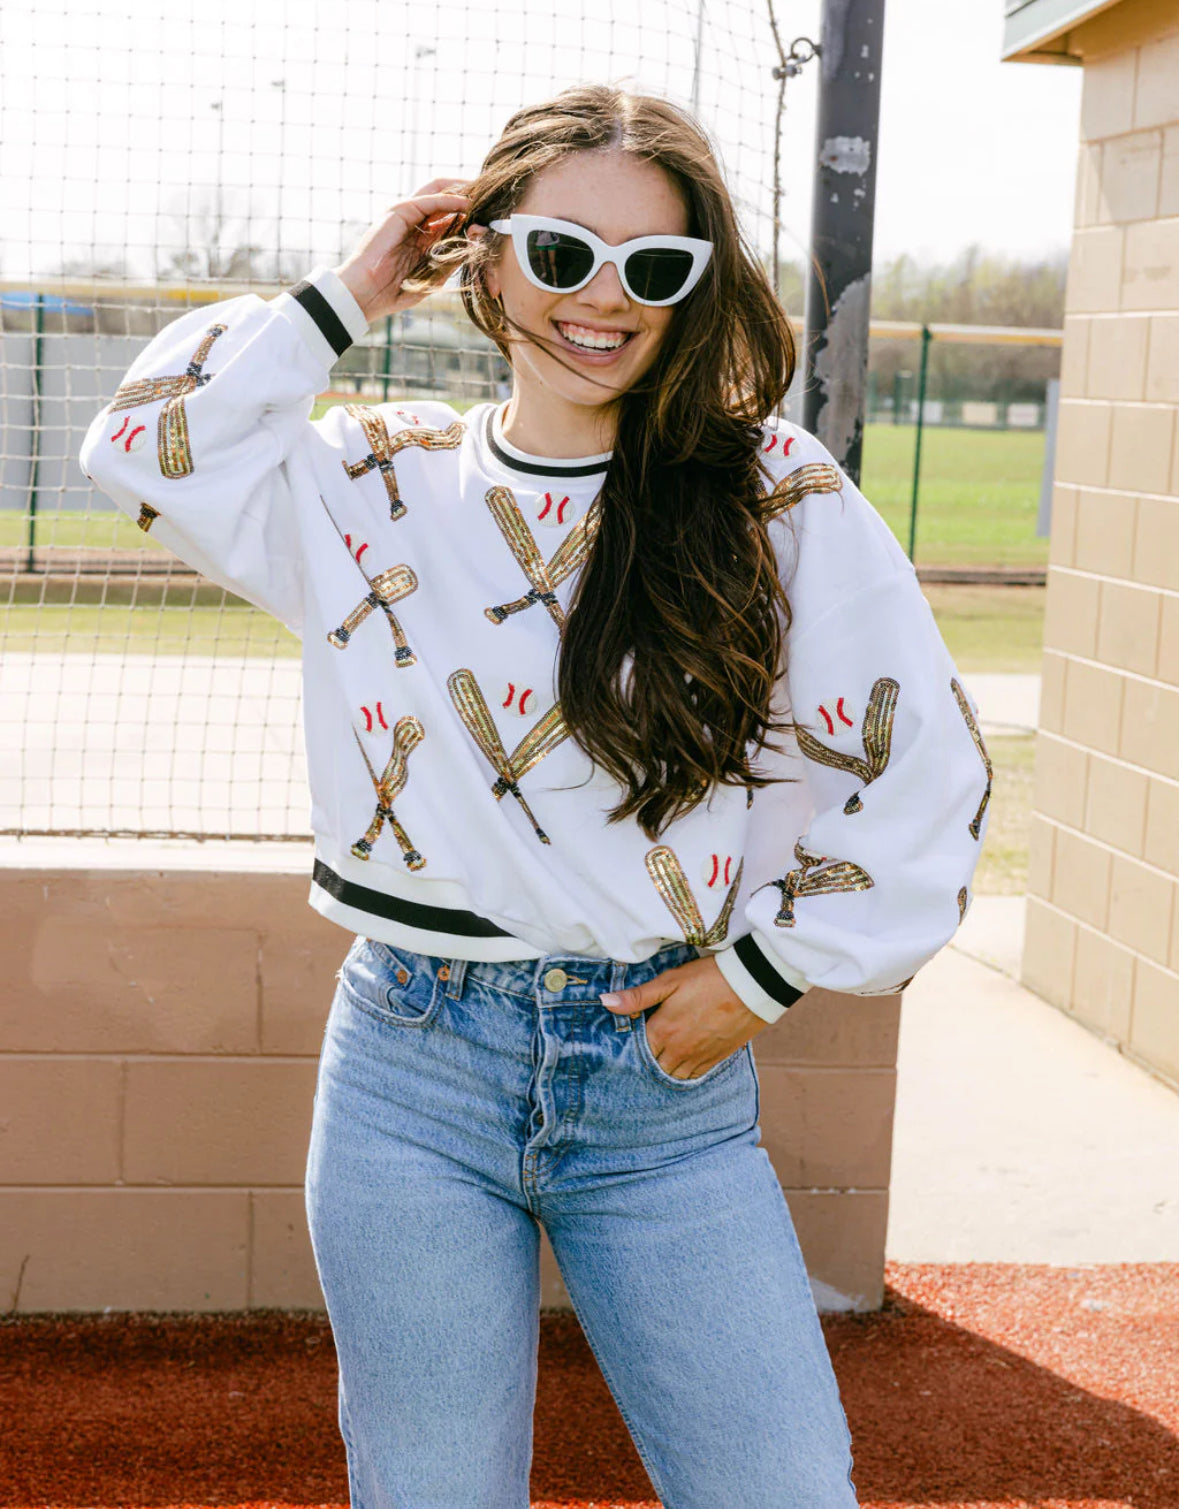 Queen of Sparkles - Scattered Baseball and Bat Sweatshirt - White